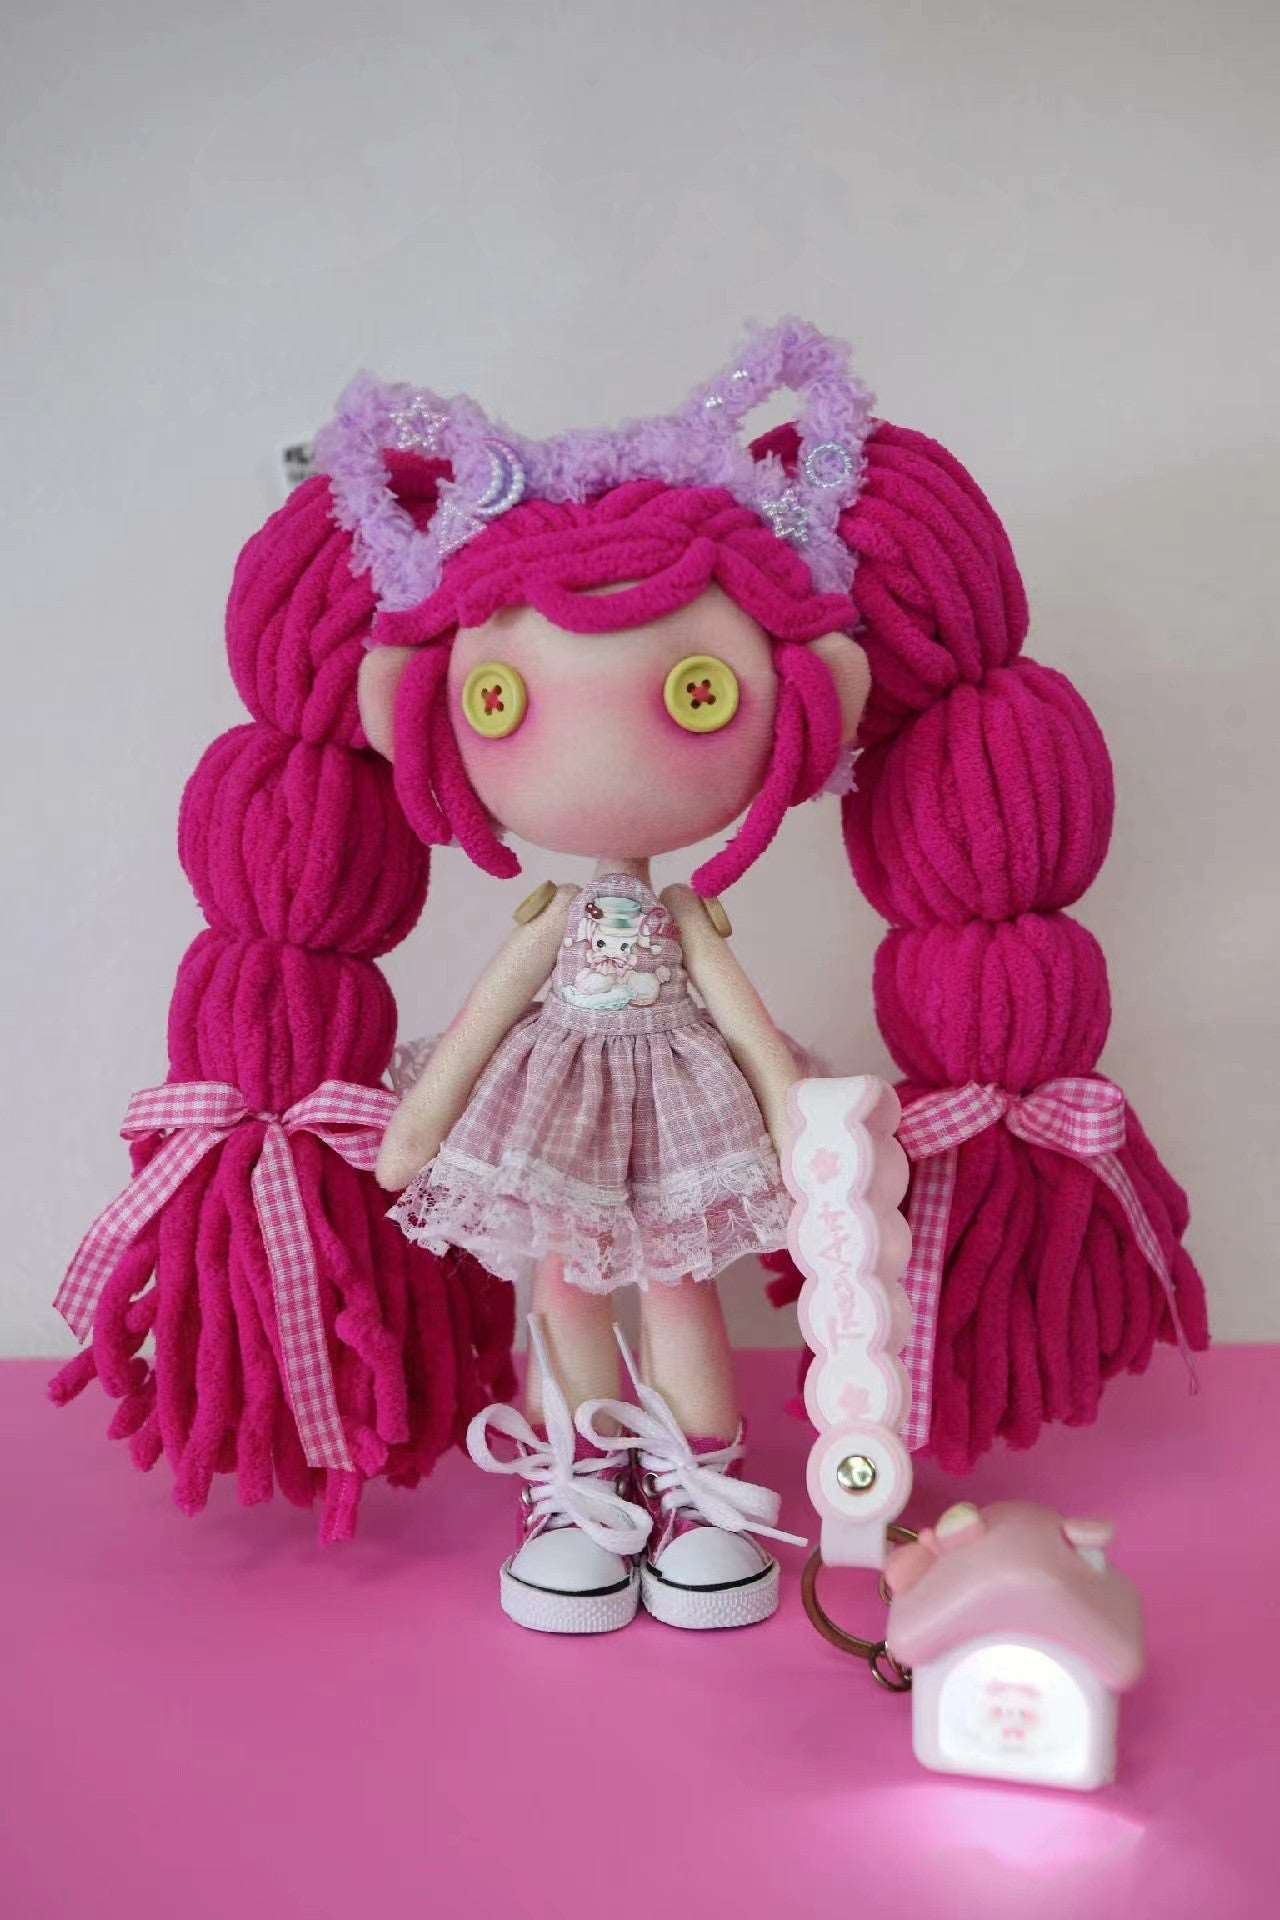 Handmade Dolls for Special Occasions and Unique Gifts for Loved Ones